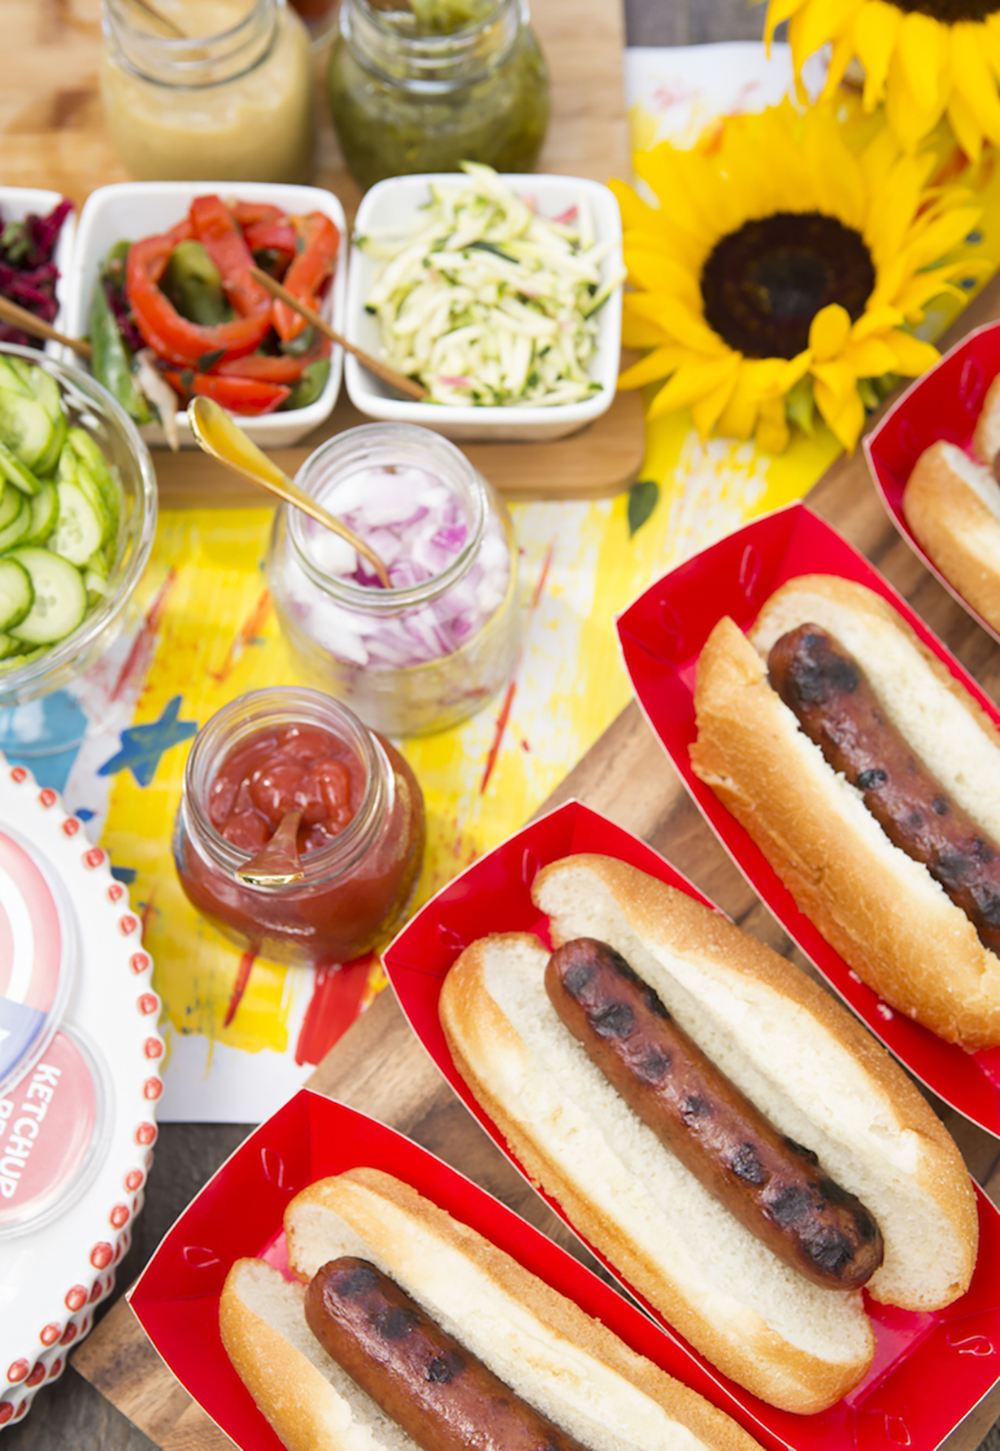 Eat a hot dog with all the fixings and LET YOURSELF LOVE IT.